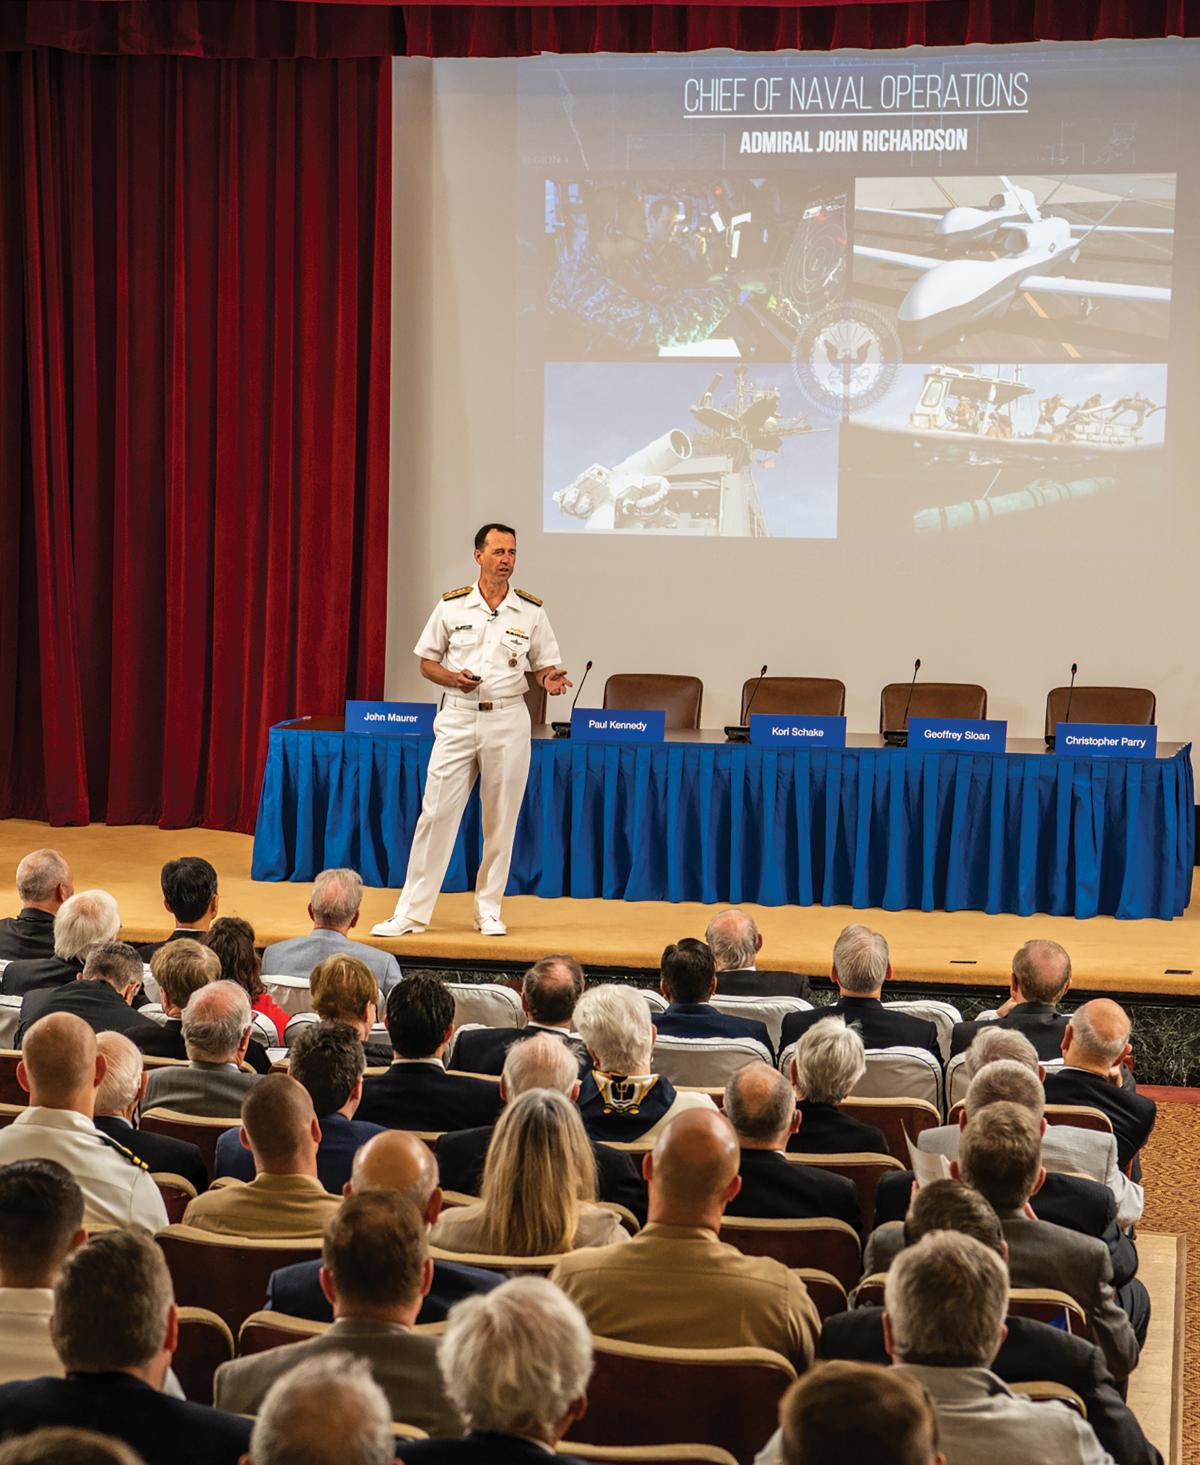 Then-Chief of Naval Operations Admiral John Richardson speaking at the Naval War College’s Current Strategy Forum 2018